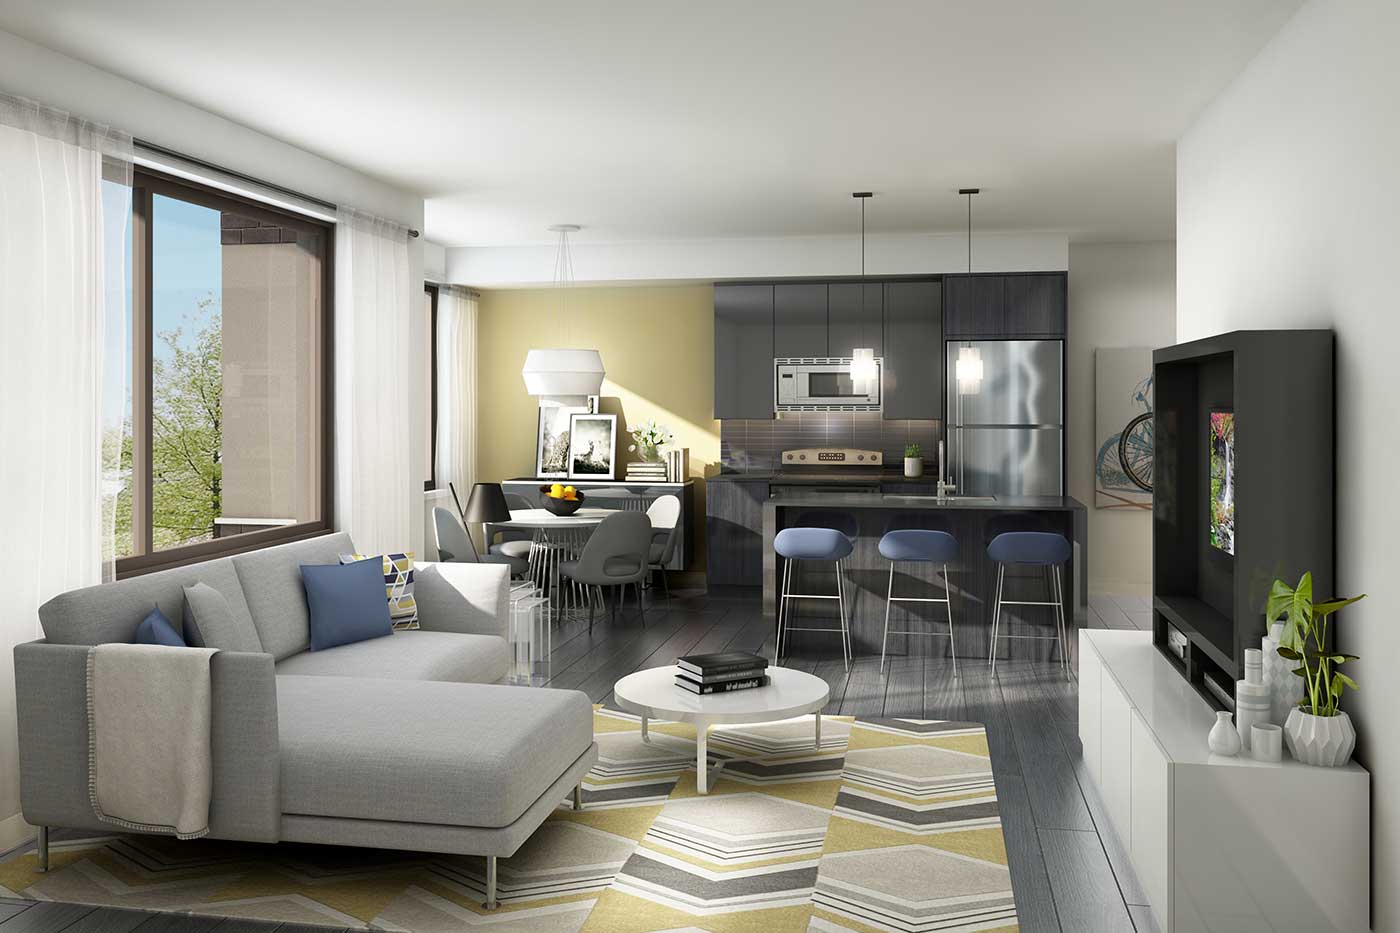 burlington-townhomes-station-west-condos-new-york-collection-flooring-features.jpg